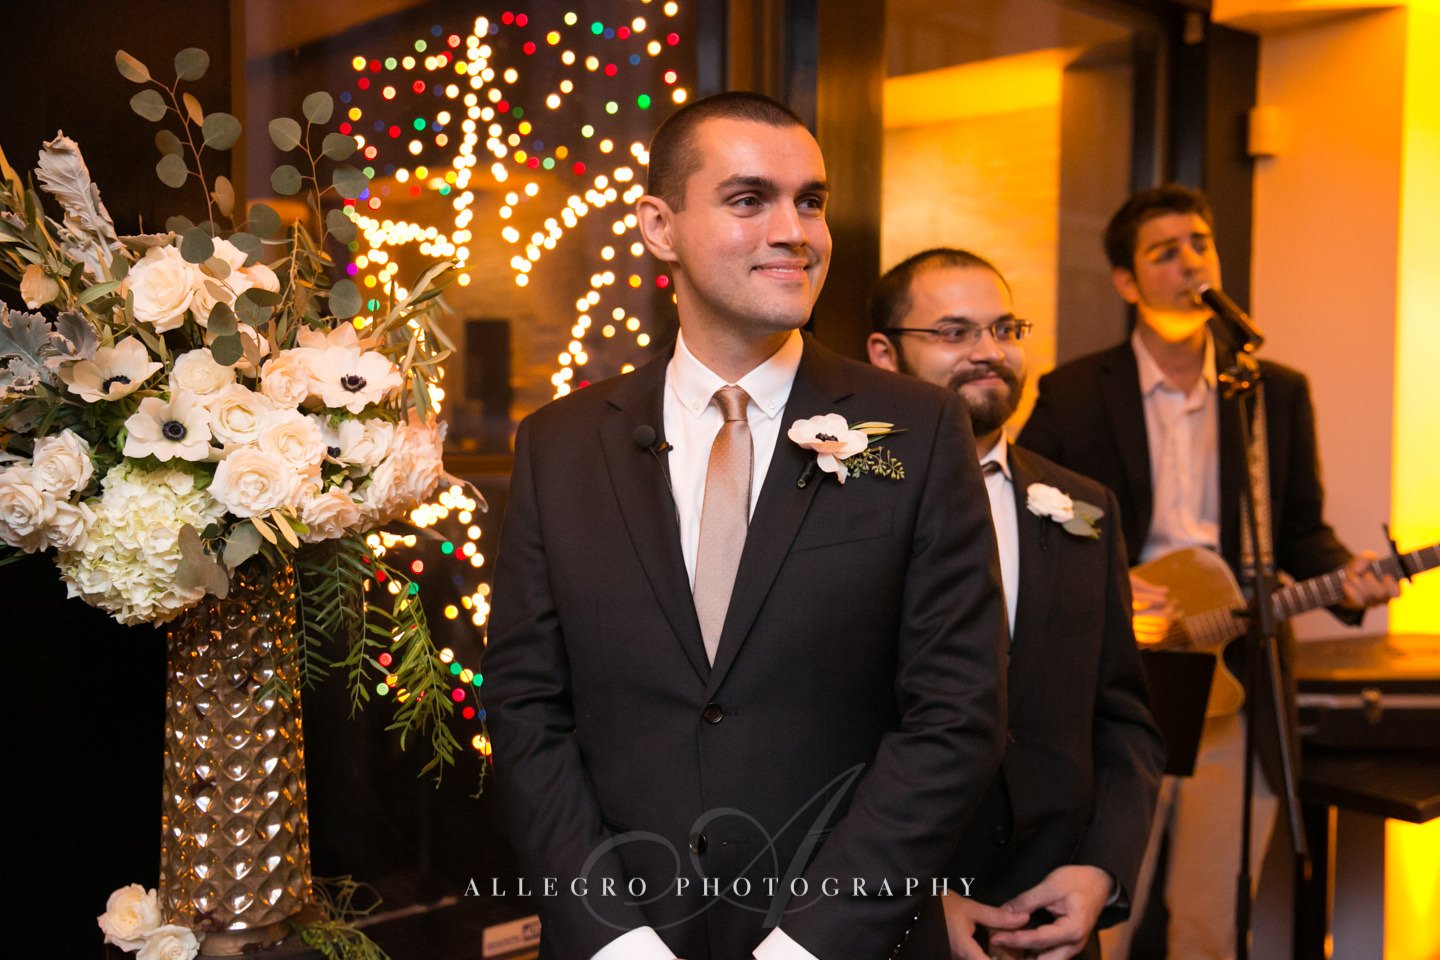 groom waiting - photo by Allegro Photography